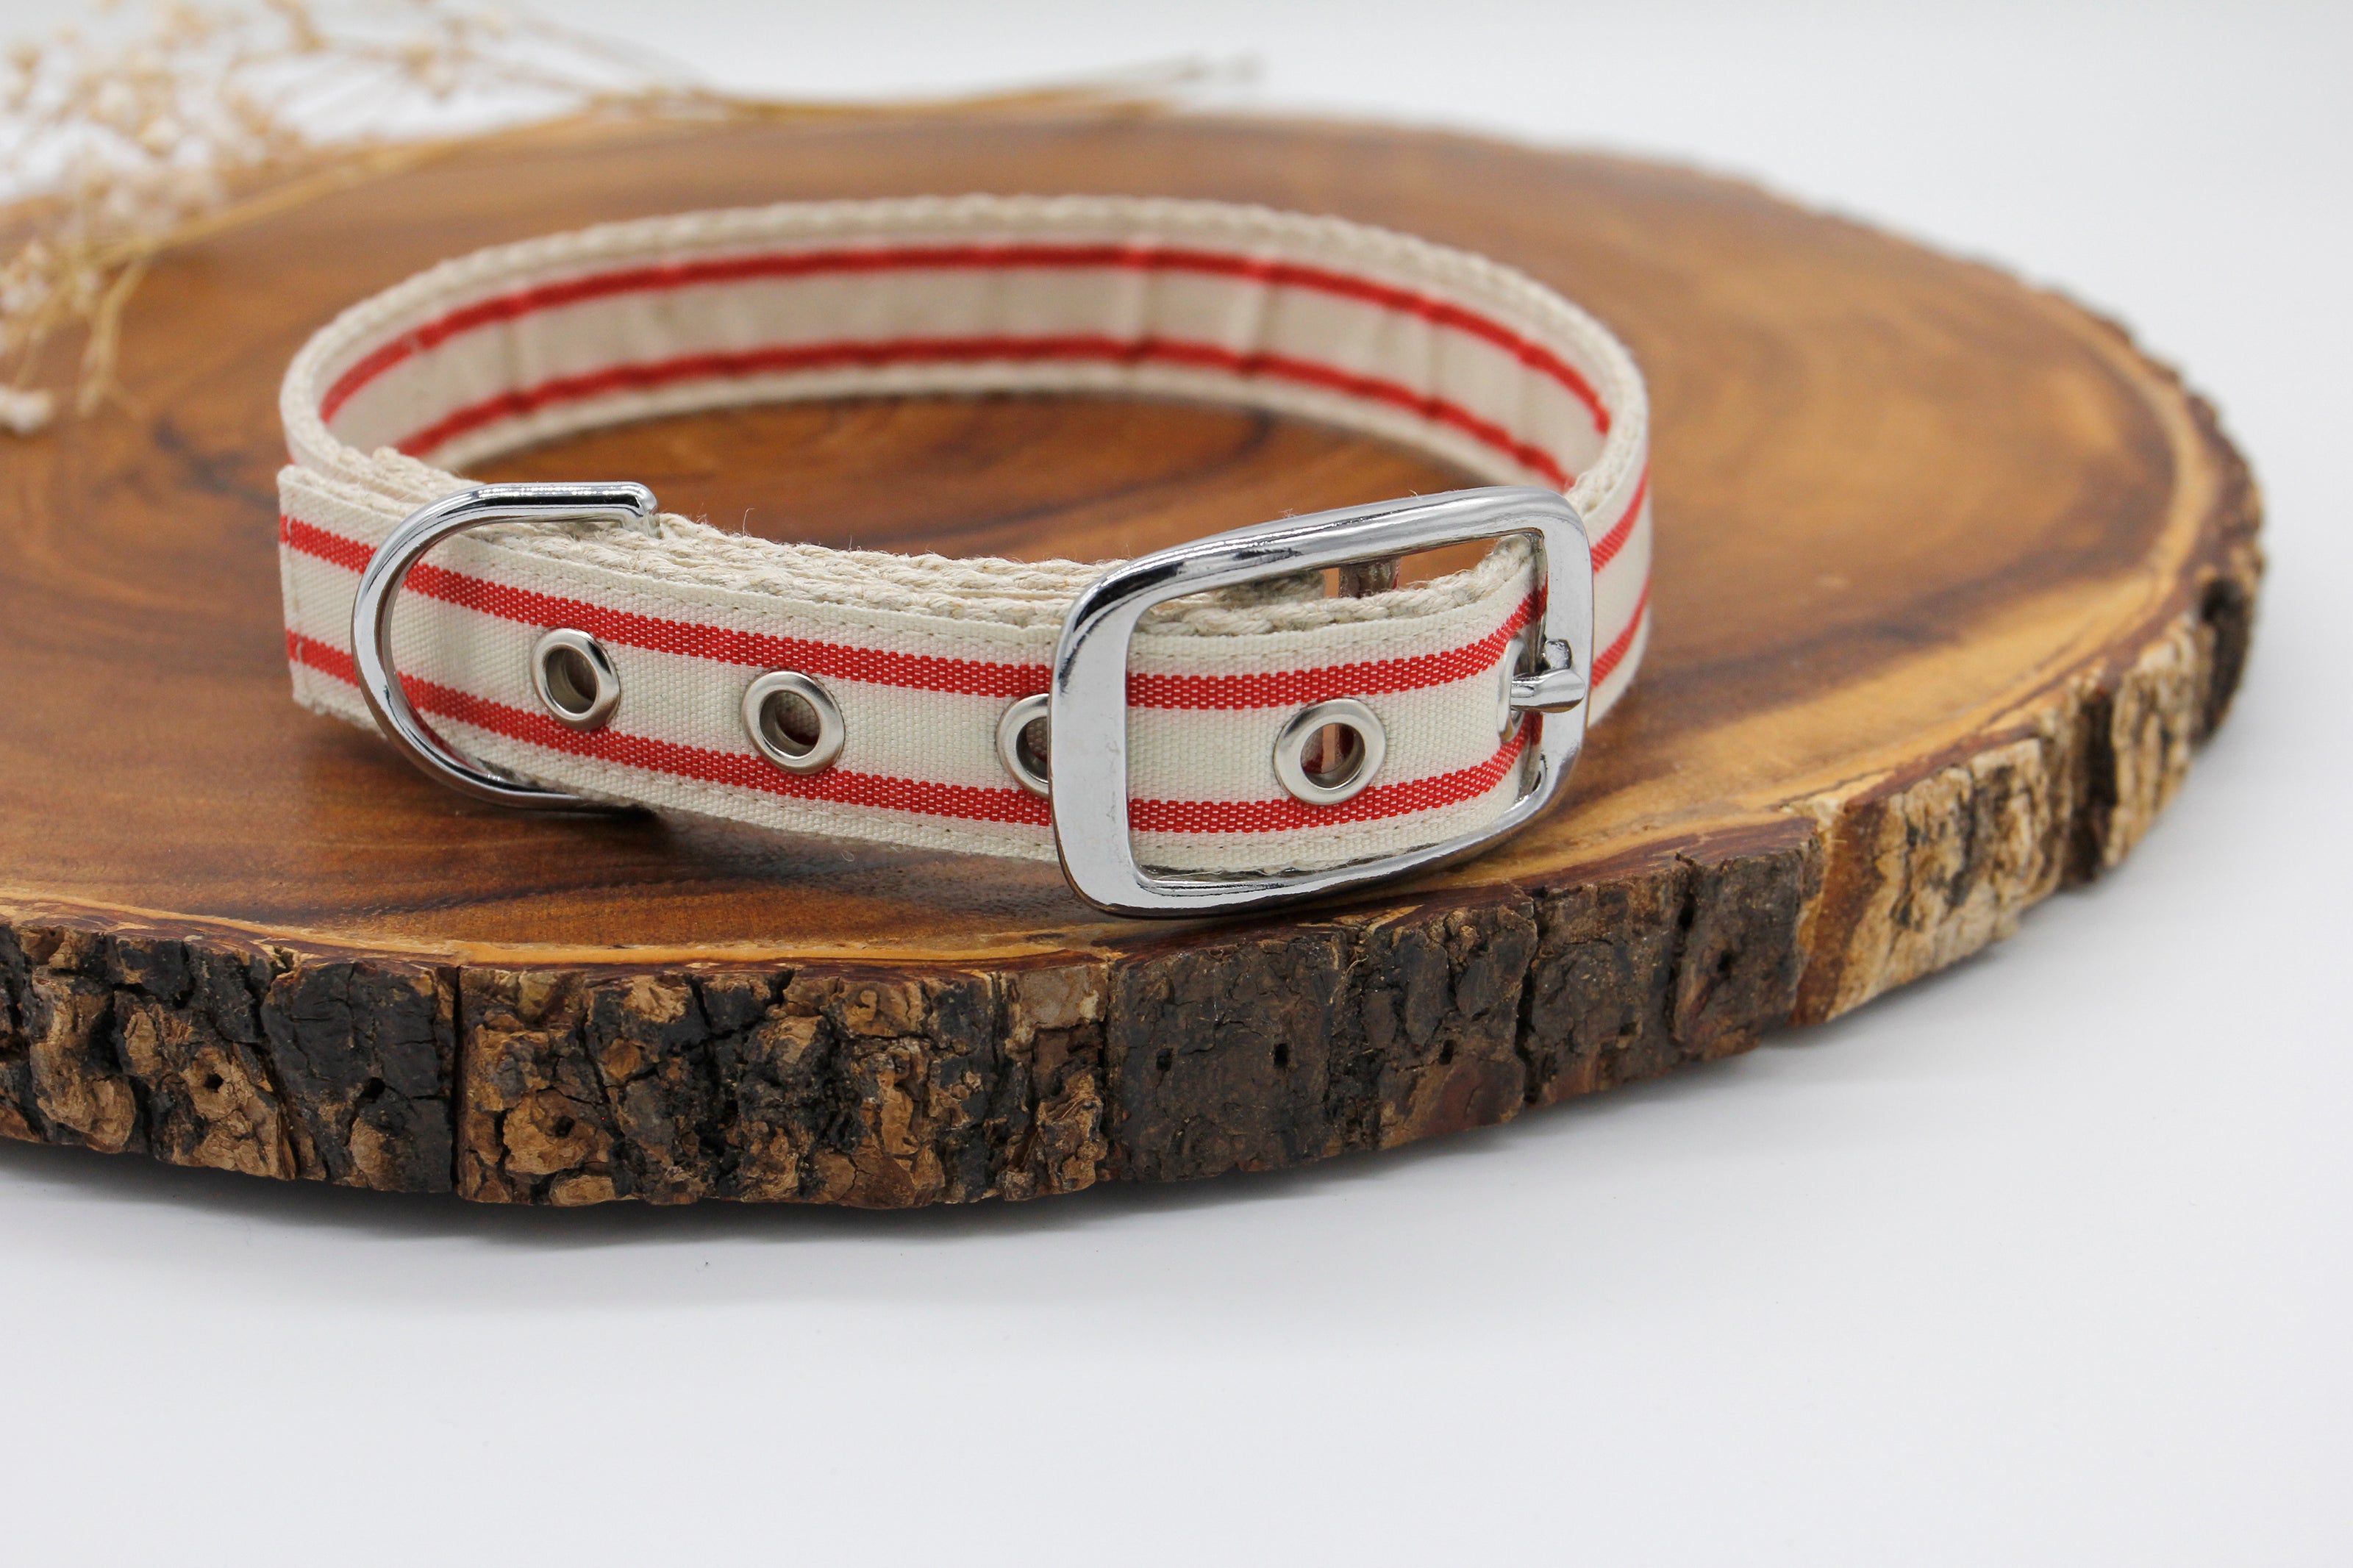 Tongue Buckle Nautical Striped Dog Collar - Red